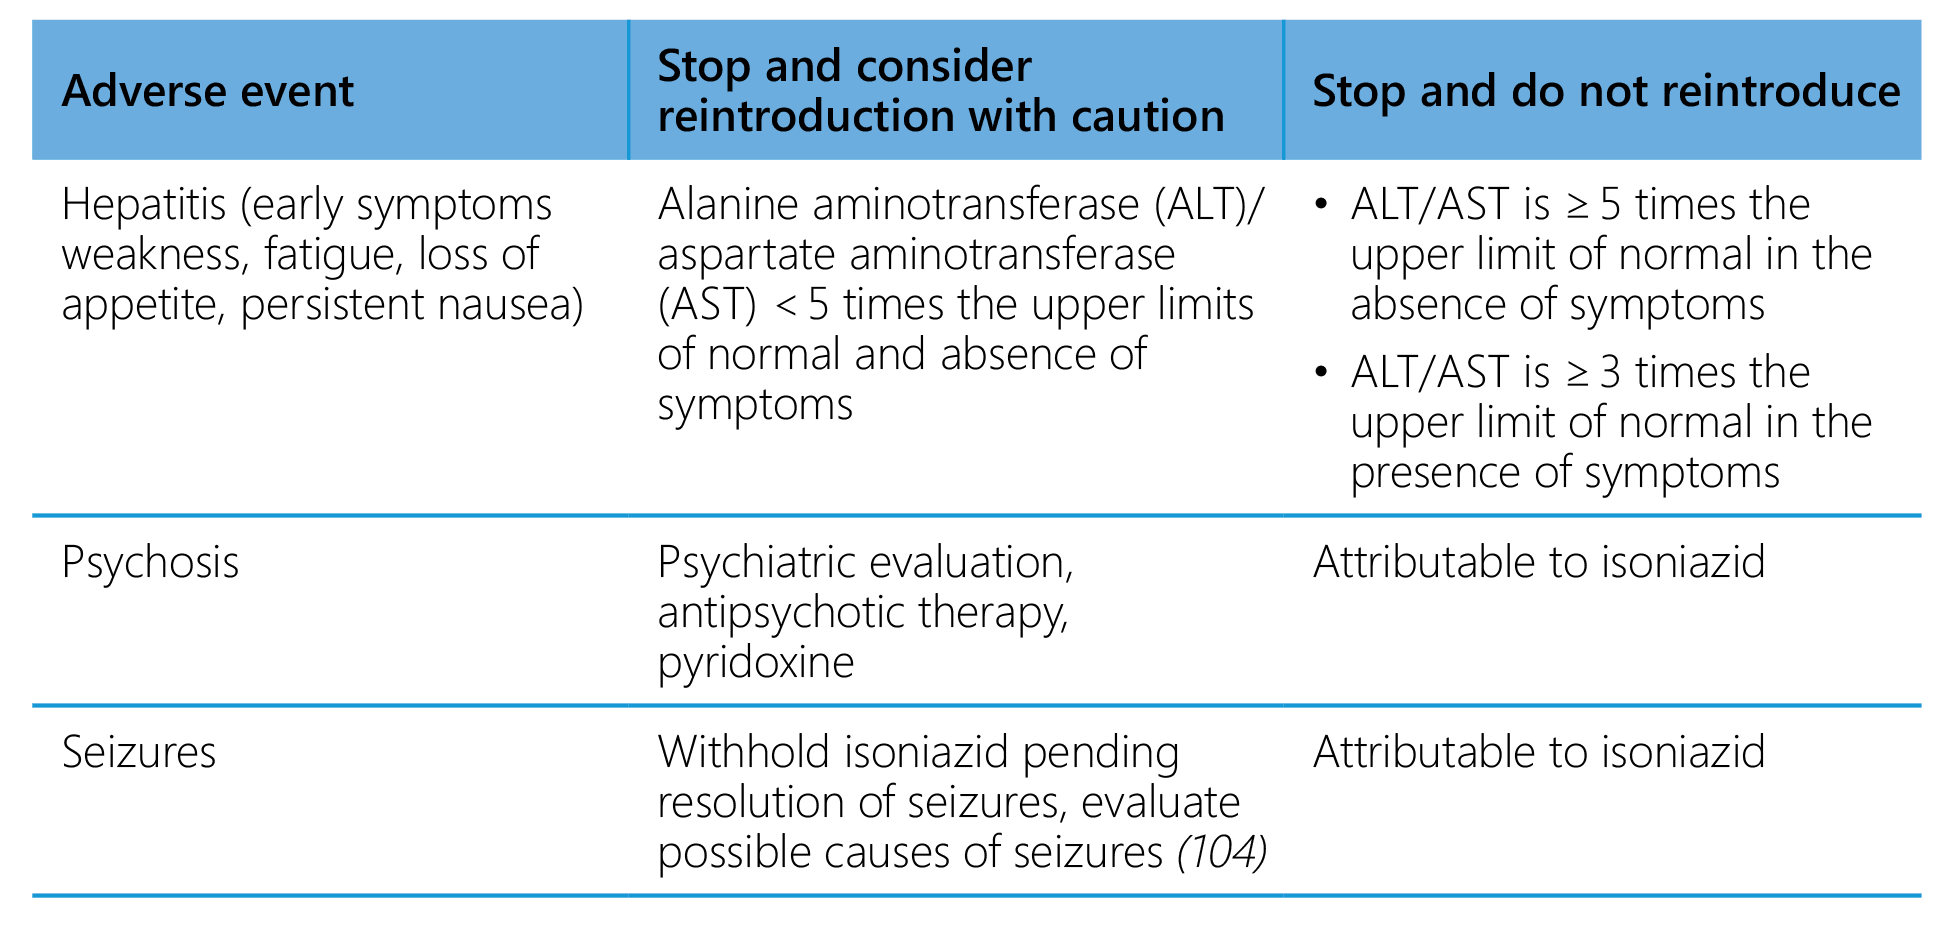 Management of potential adverse reactions